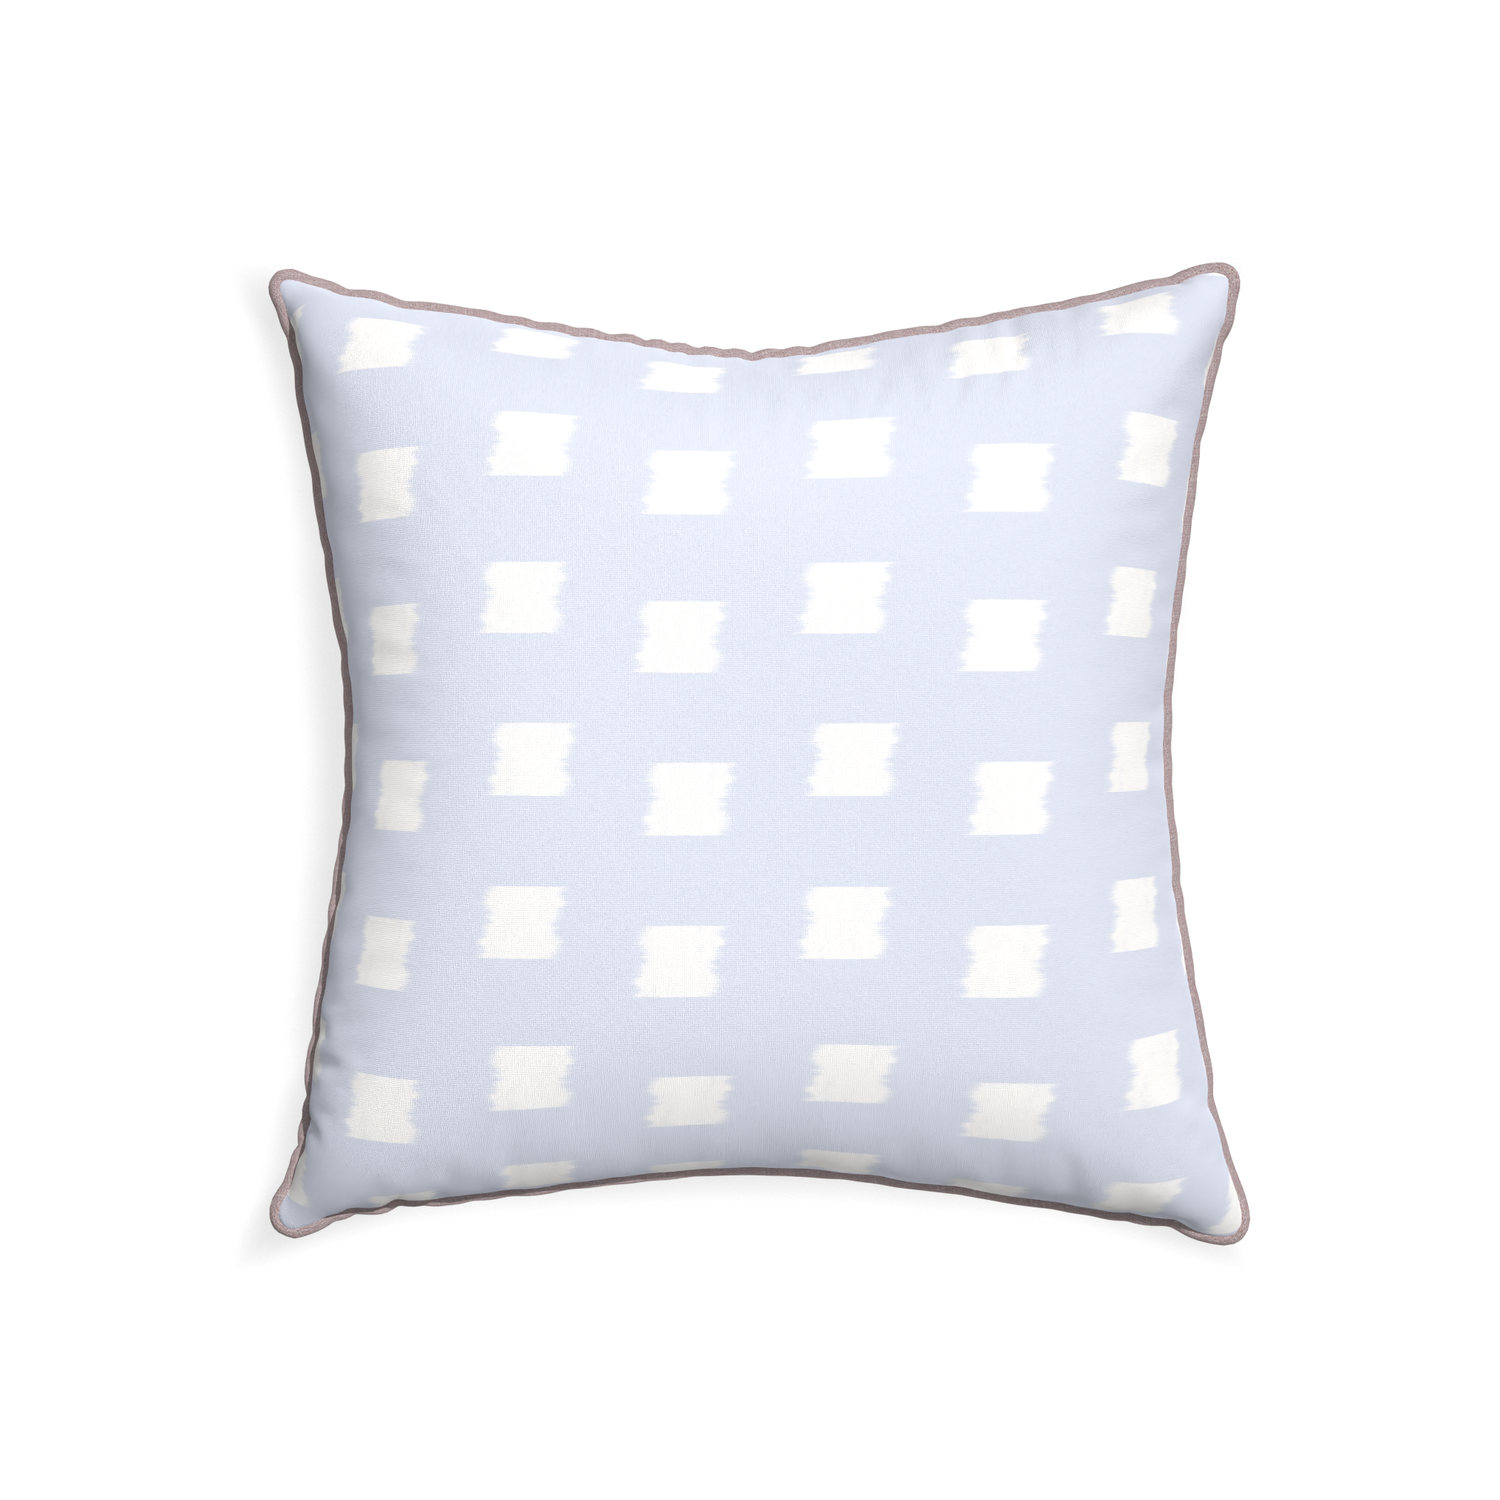 22-square denton custom sky blue patternpillow with orchid piping on white background